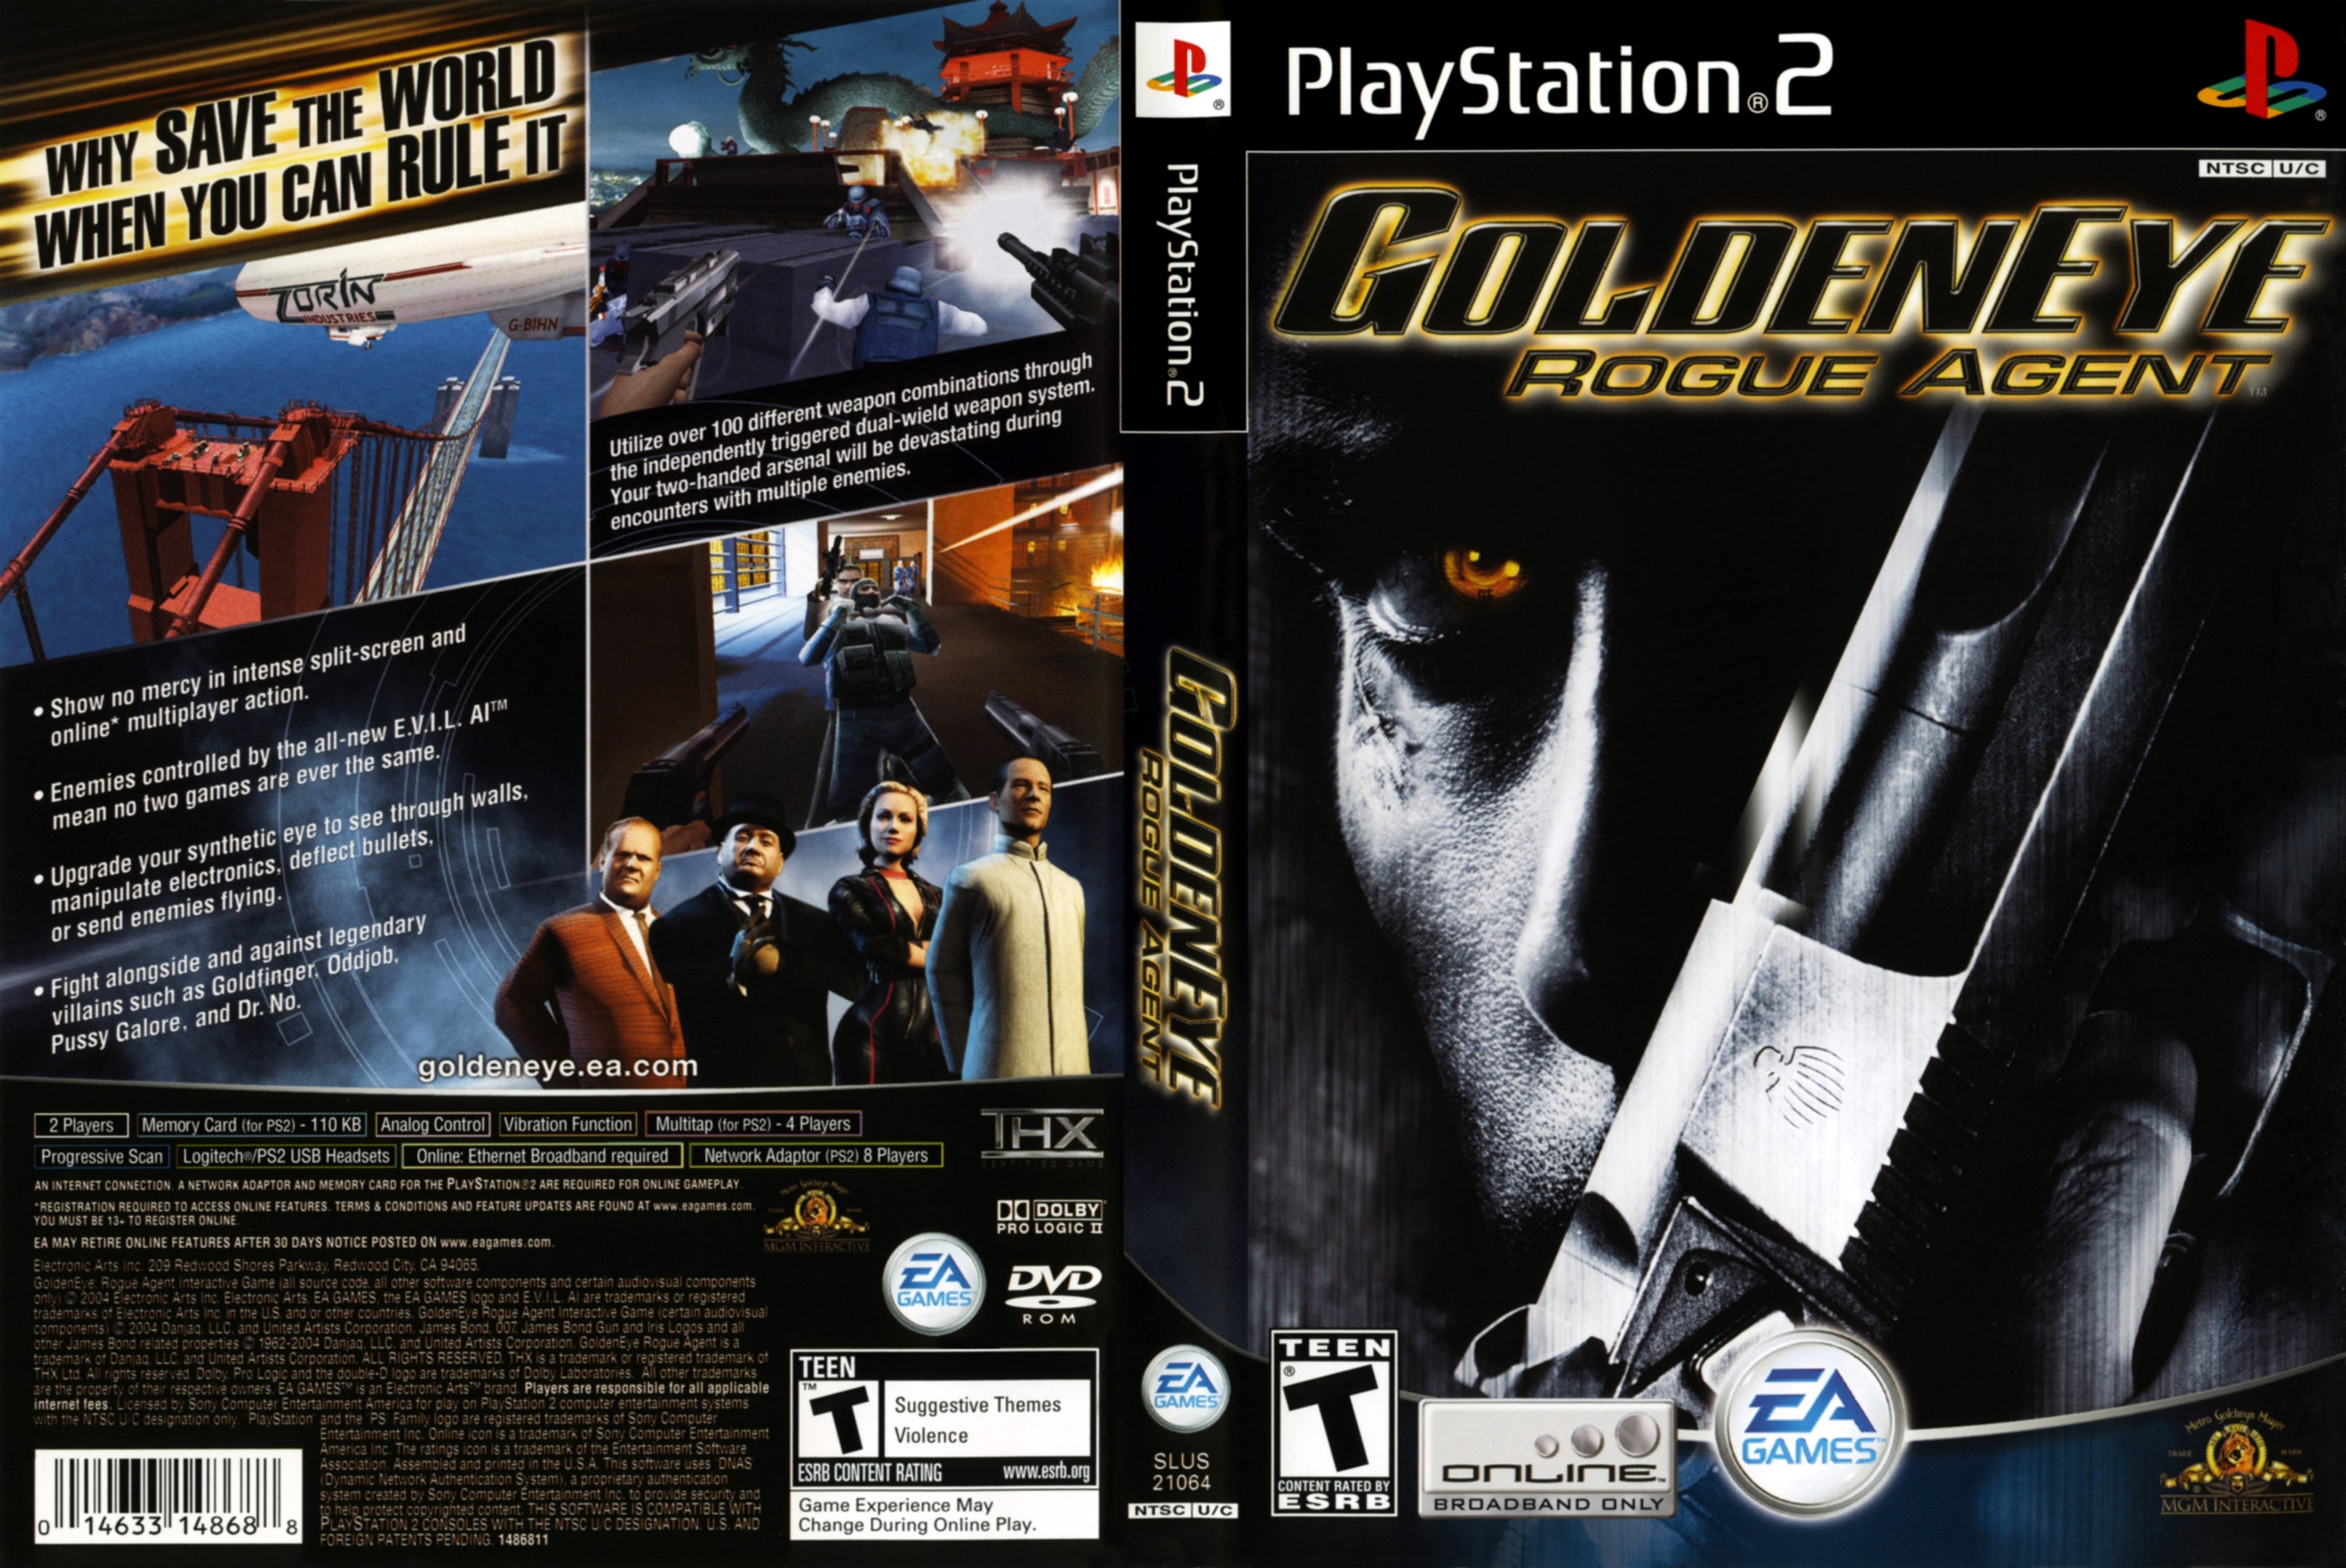 GoldenEye: Rogue Agent video game for PS2